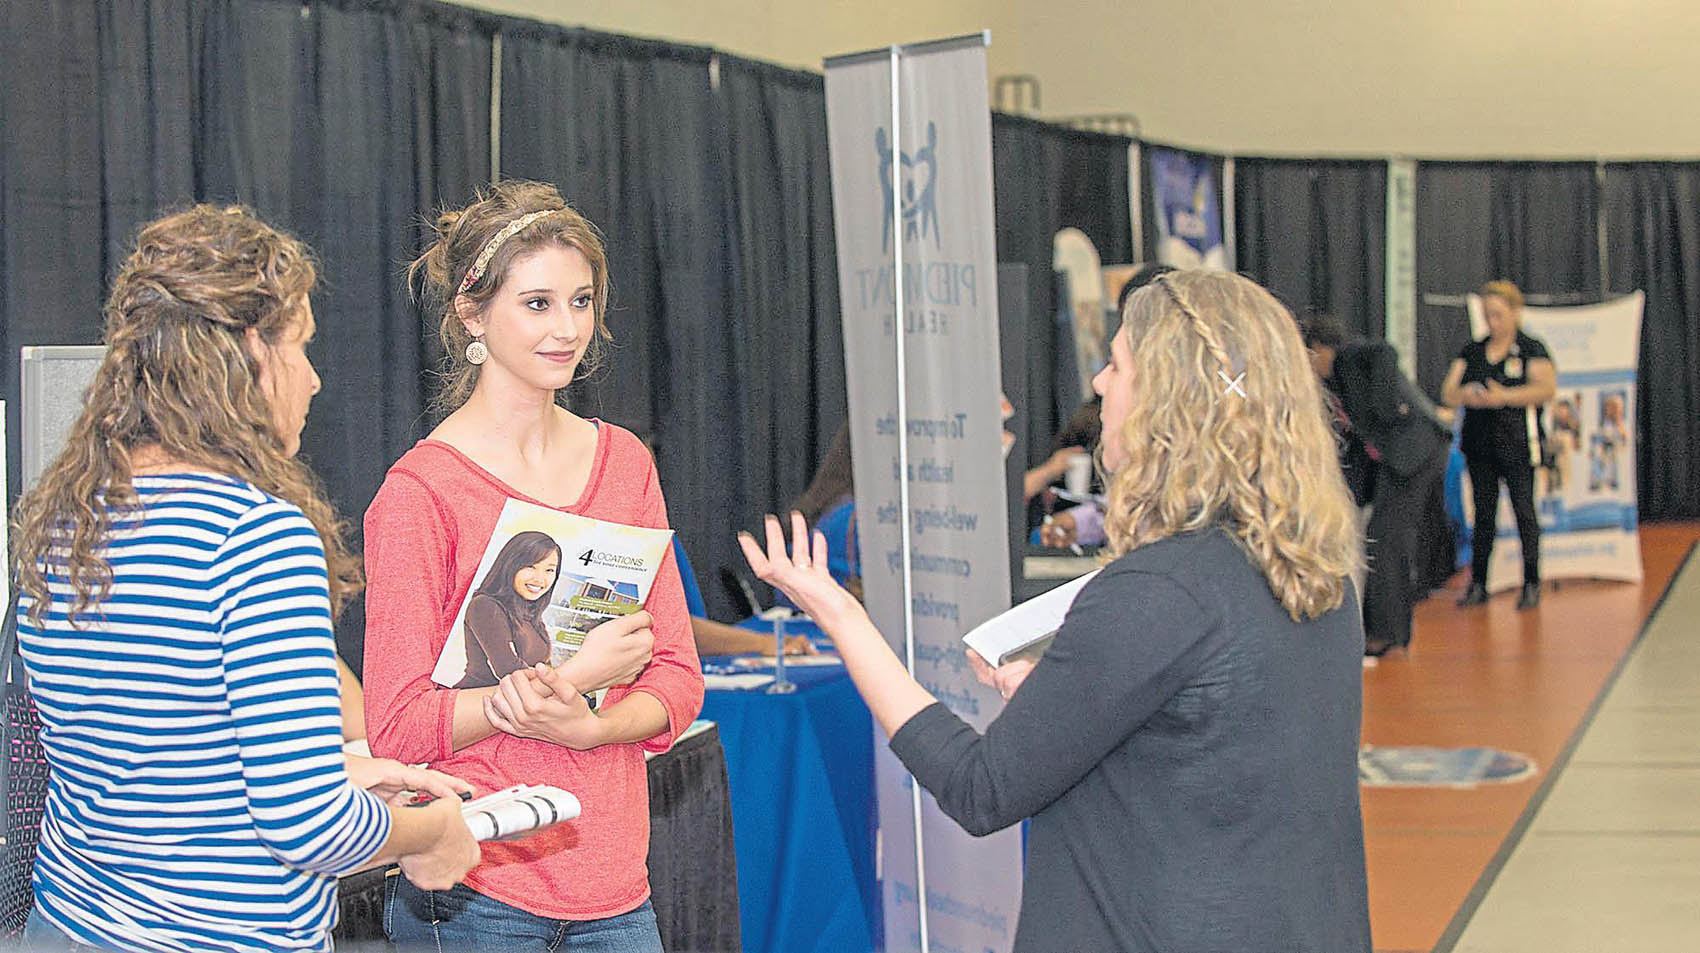 Click to enlarge,  Hannah Hunsinger | The Sanford Herald   Sylvia Wrenn, 17, (second from left) and her mom Allison Wrenn, of Fuquay-Varina, chat with Lisa Godfrey, Dean of Health Sciences at CCCC, about nursing school options during the Healthcare Career Fair at CCCC on May 3. 